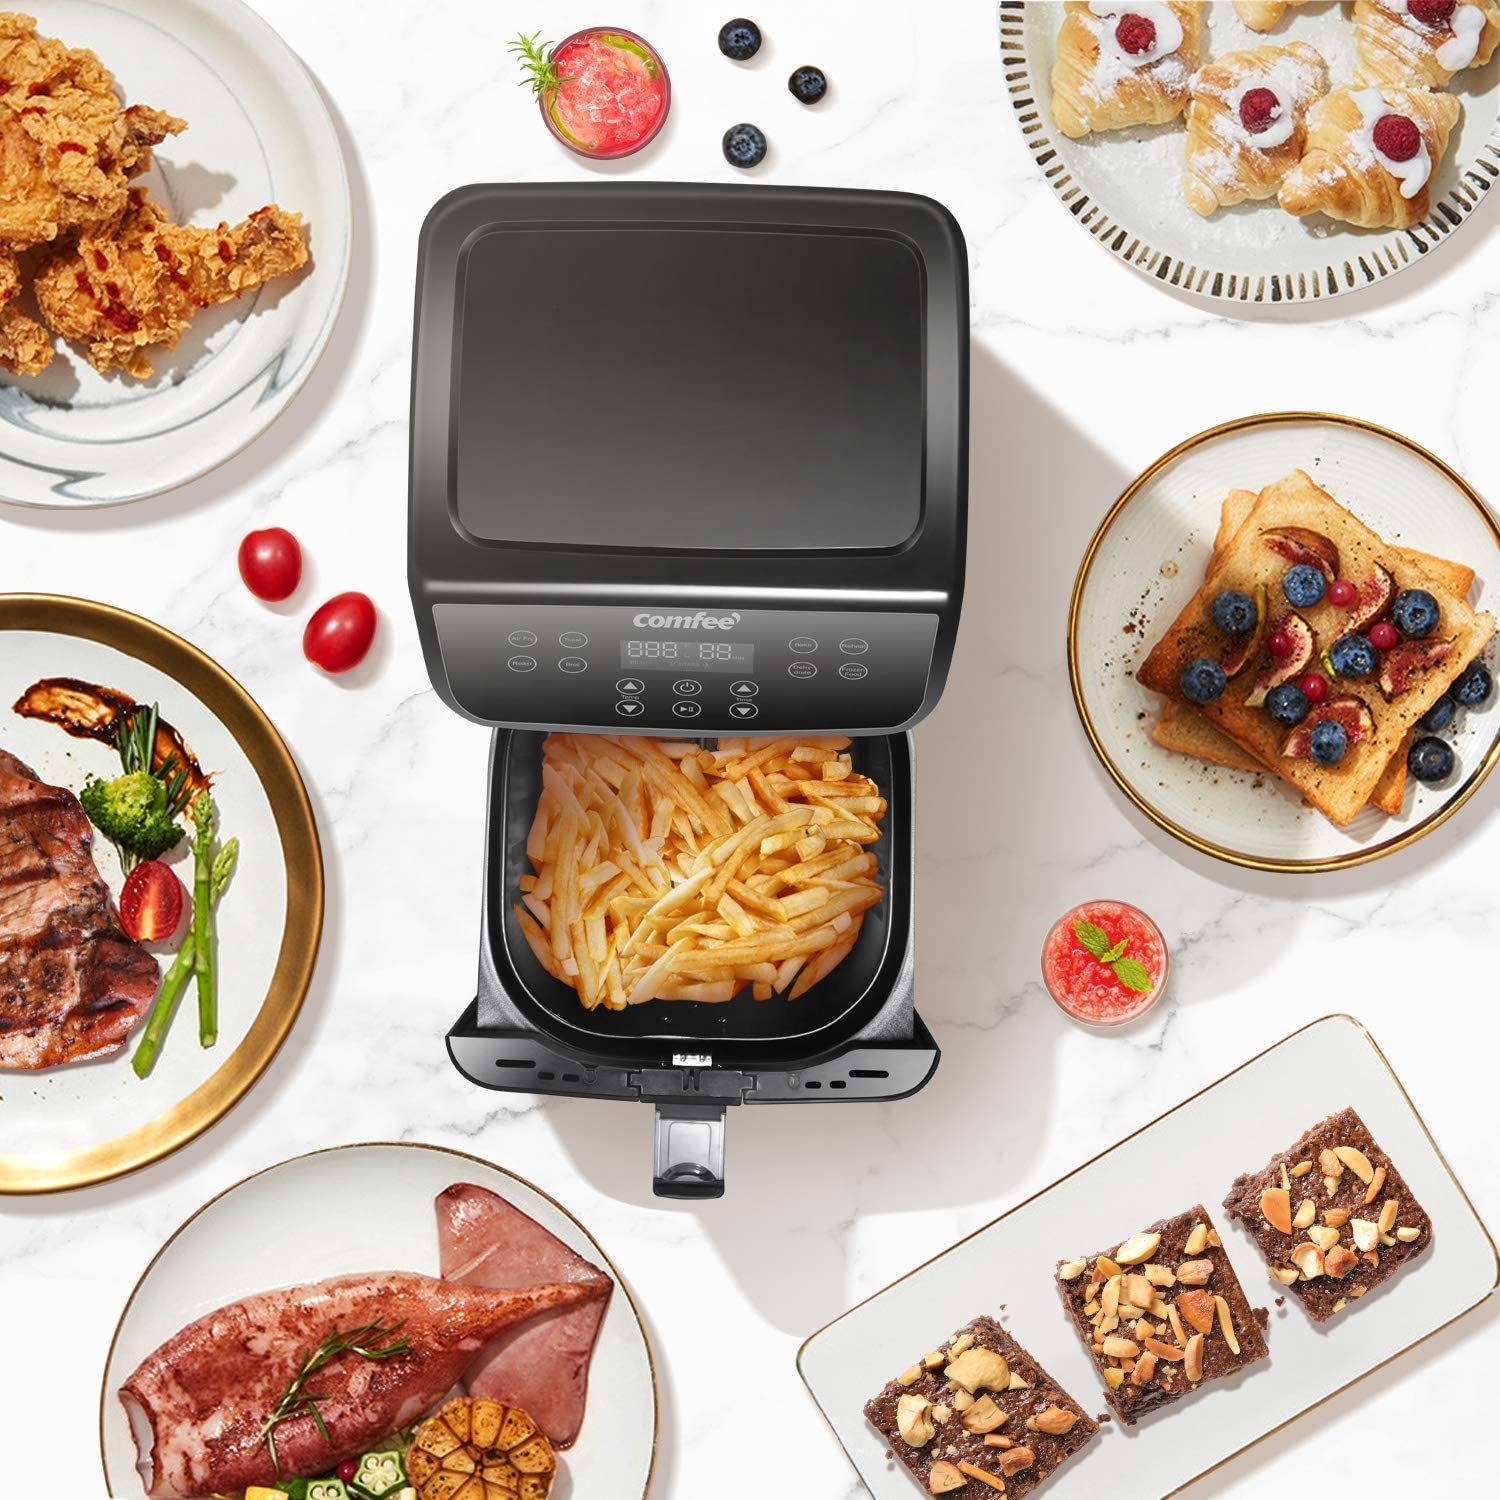 COMFEE' 5.8Qt Digital Air Fryer, Toaster Oven & Oilless Cooker, 1700W with  8 Preset Functions, LED Touchscreen, Shake Reminder, Non-stick Detachable